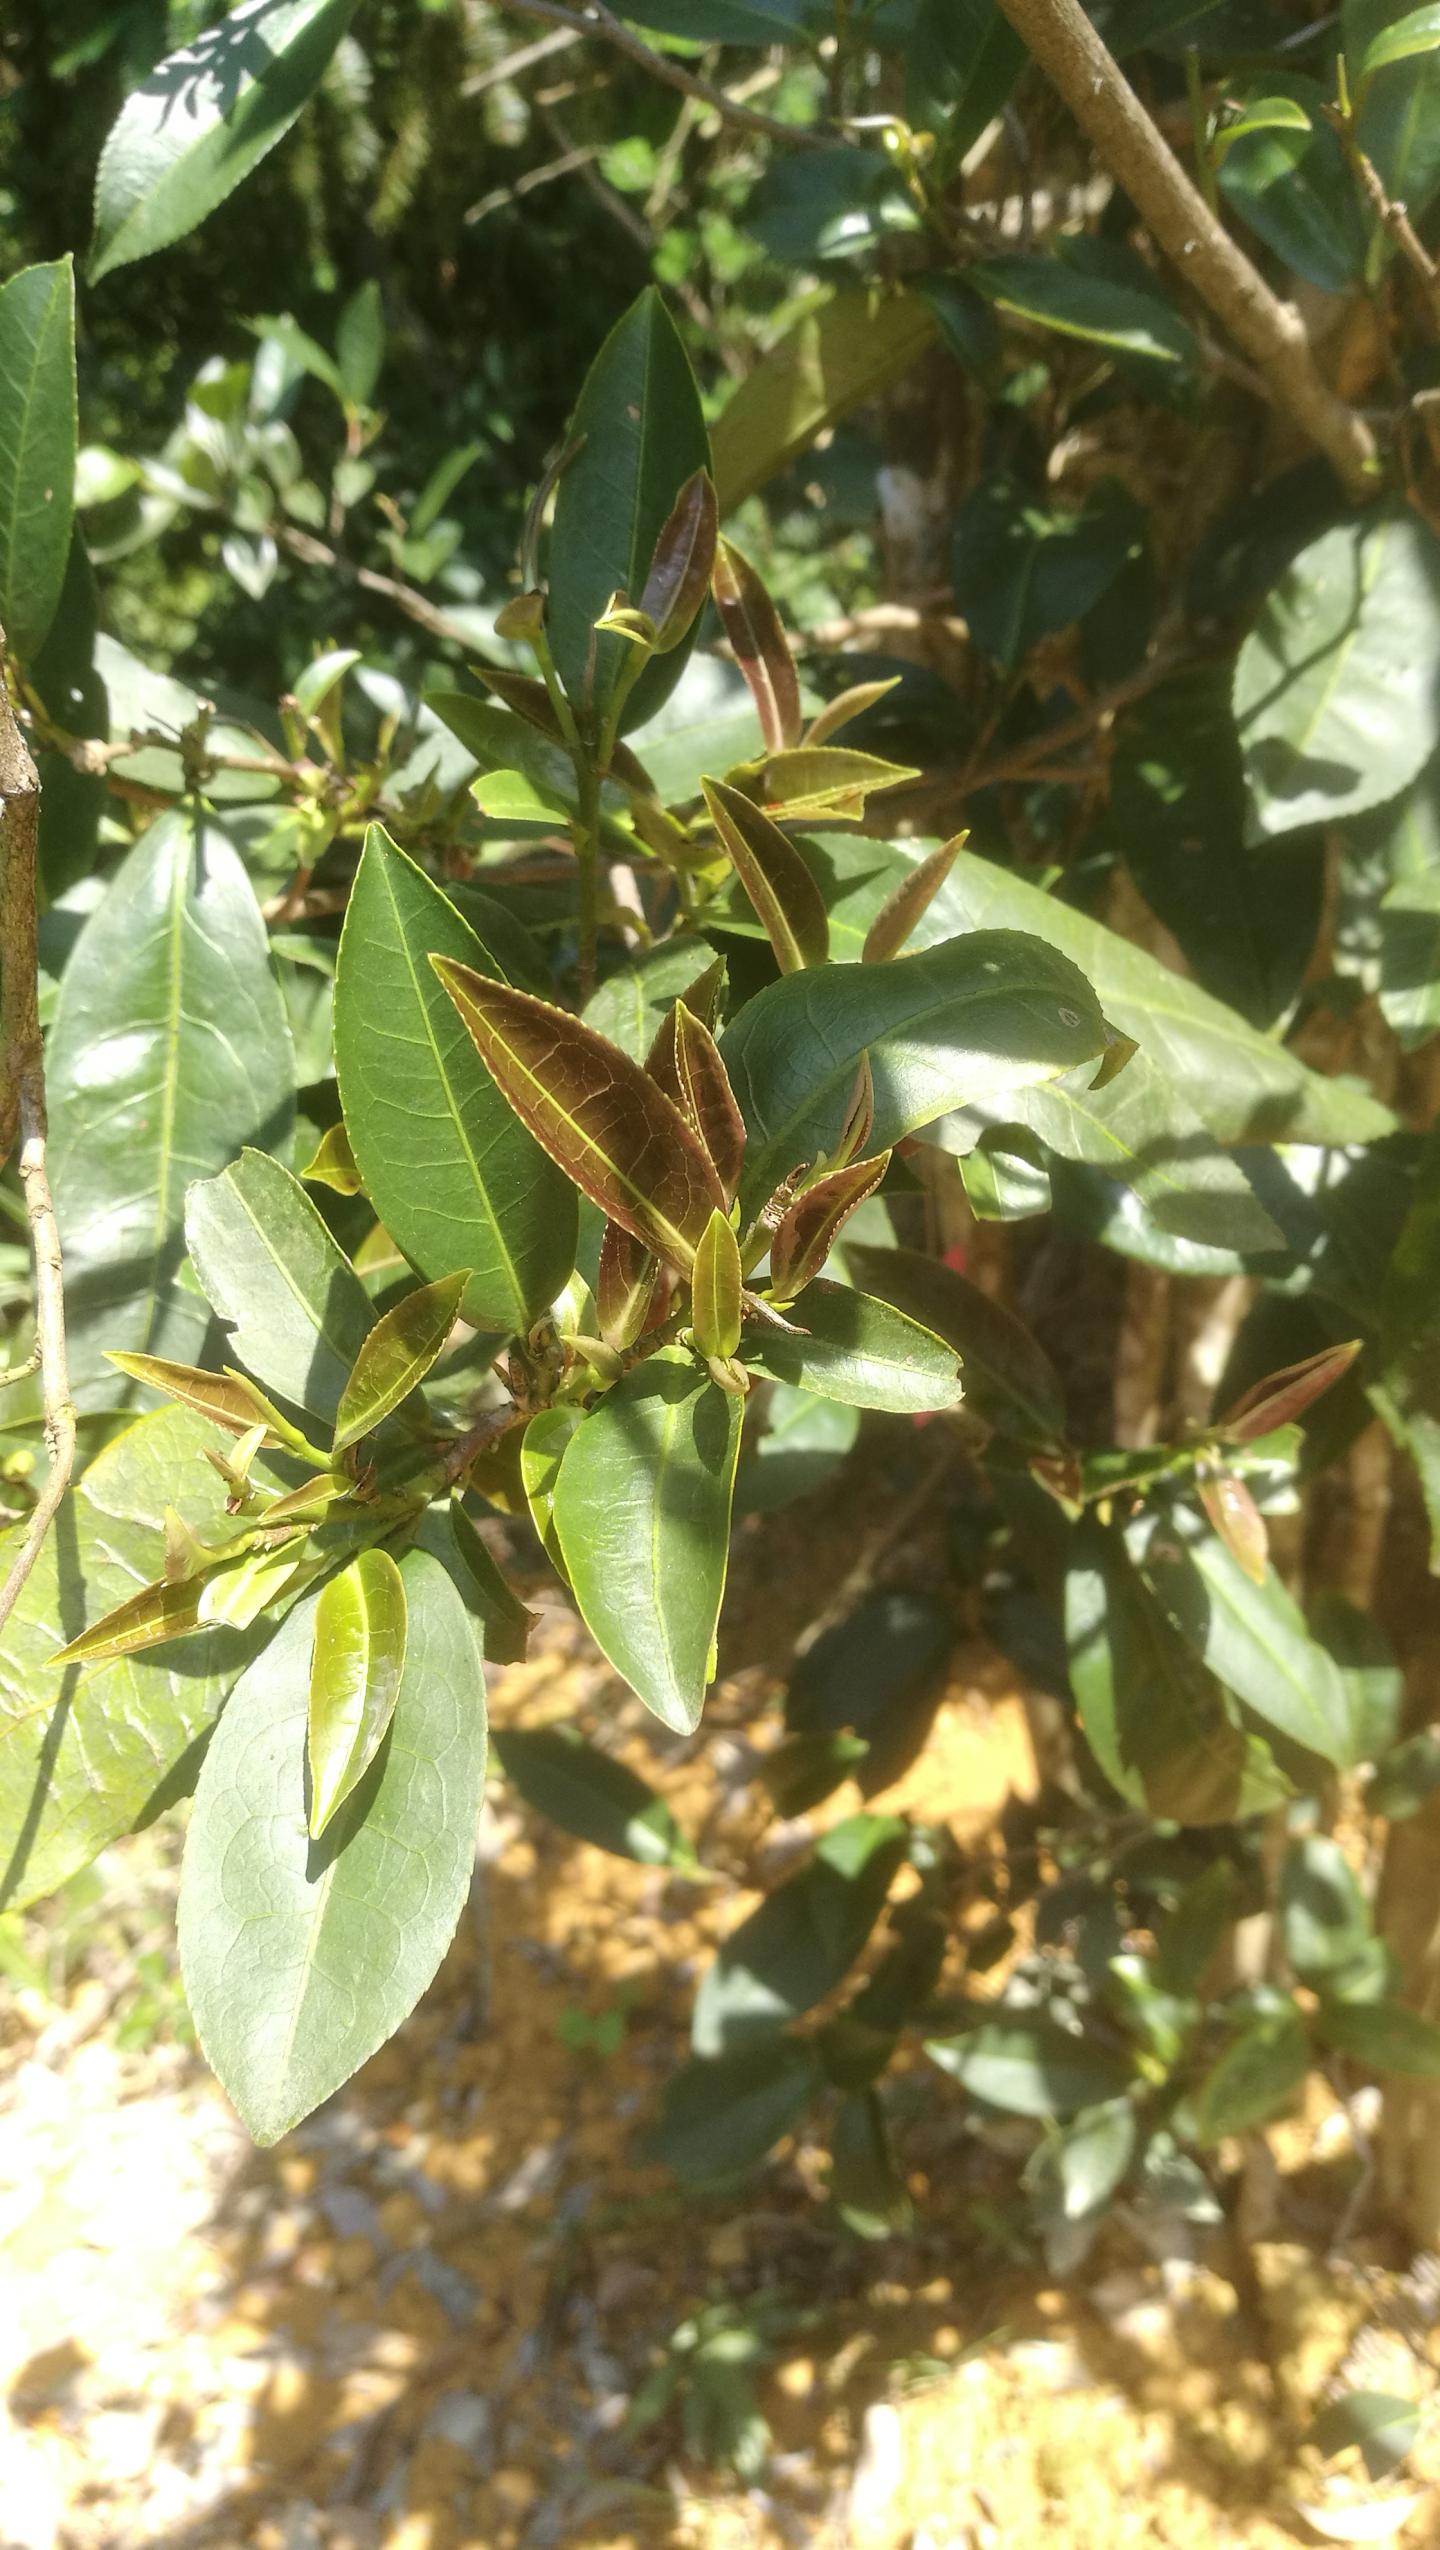 A Newly Discovered, Naturally Low-Caffeine Tea Plant